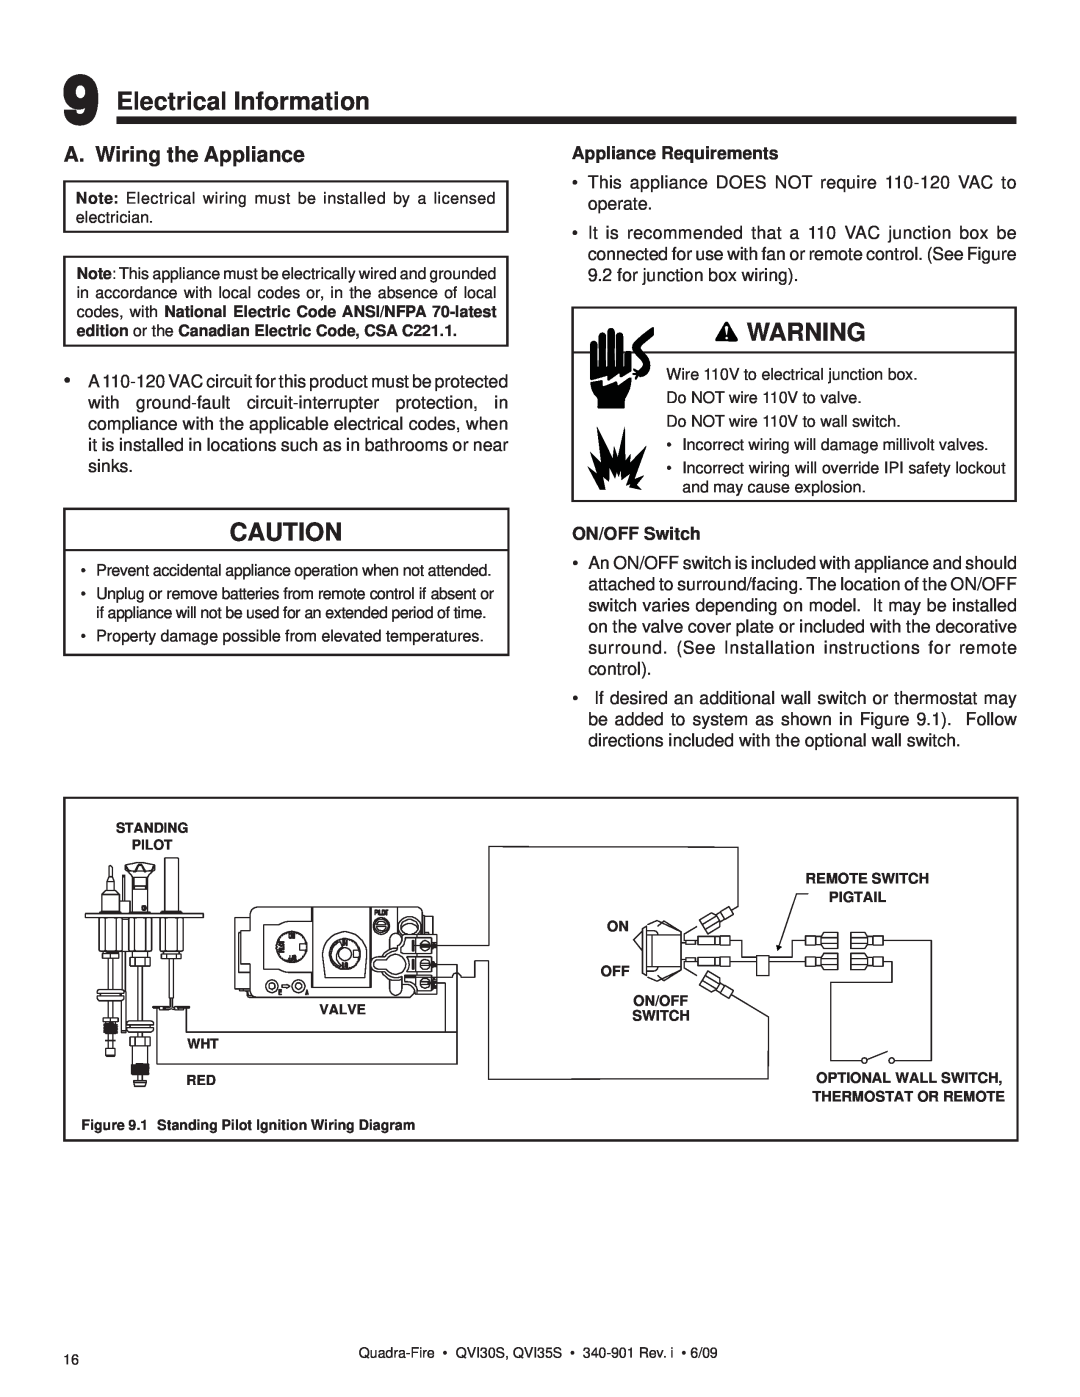 Quadra-Fire QVI35S, QVI30S owner manual Electrical Information, A. Wiring the Appliance 